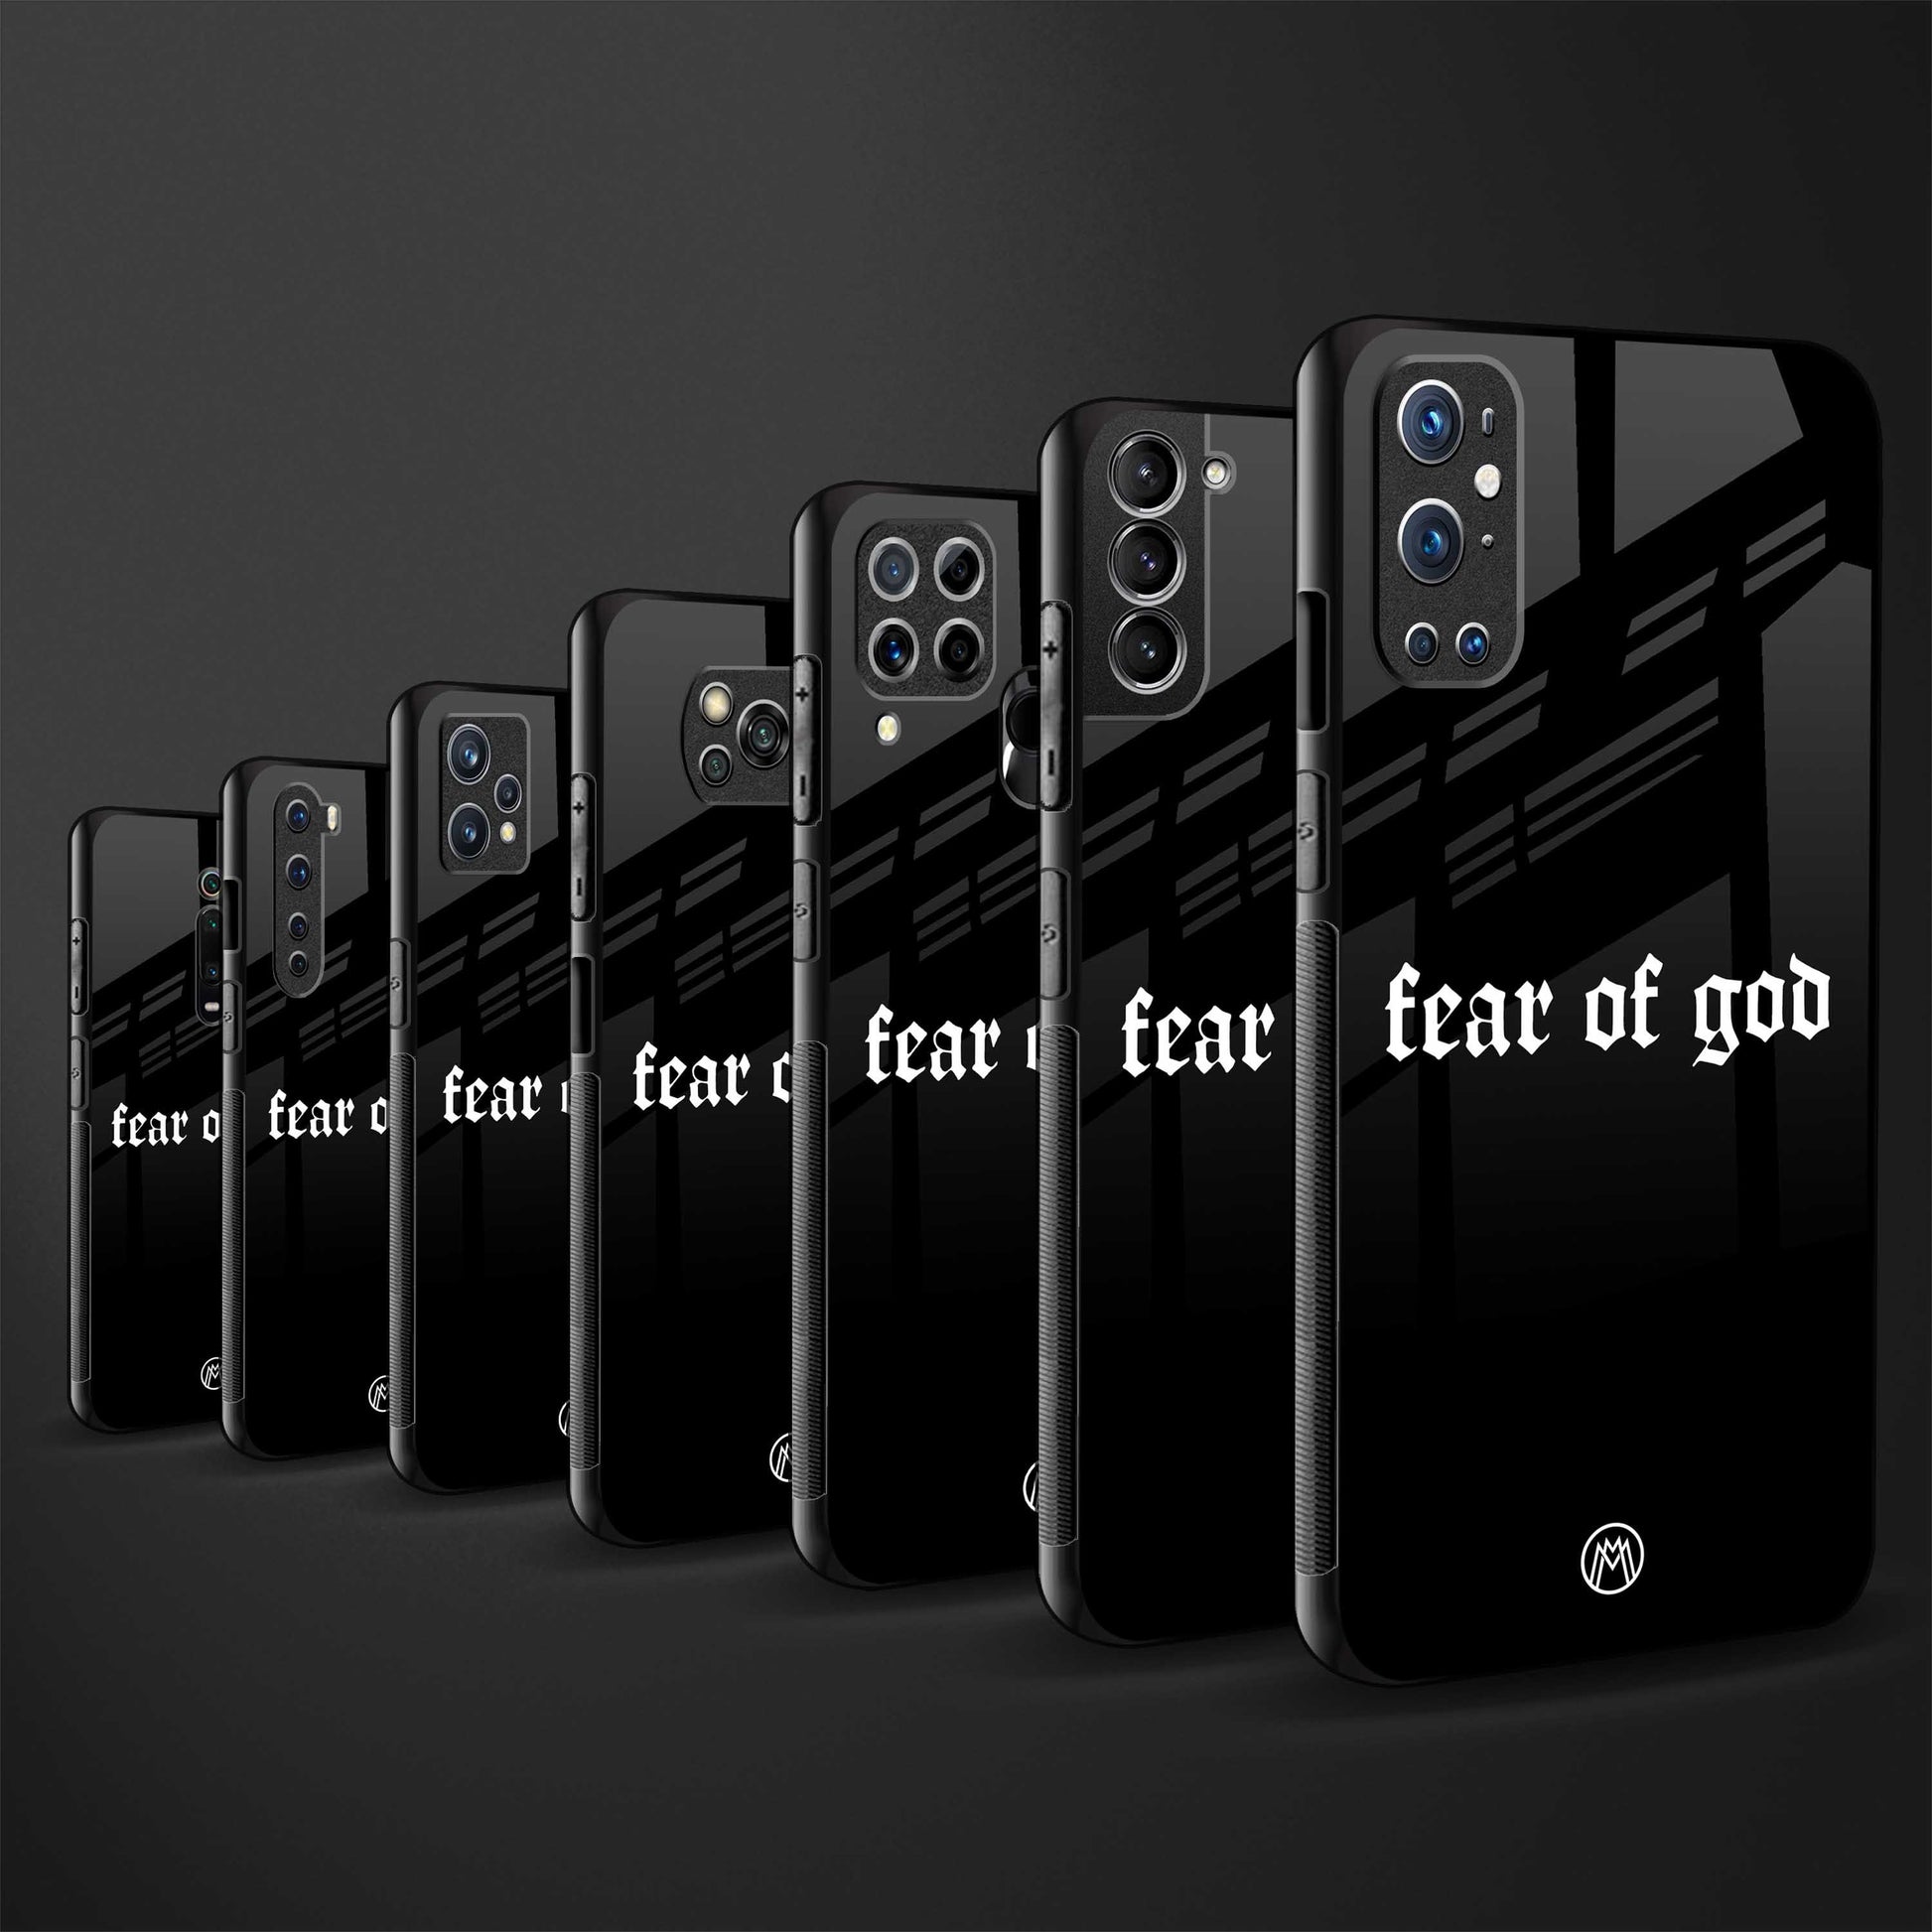 fear of god phone cover for mi 11 lite